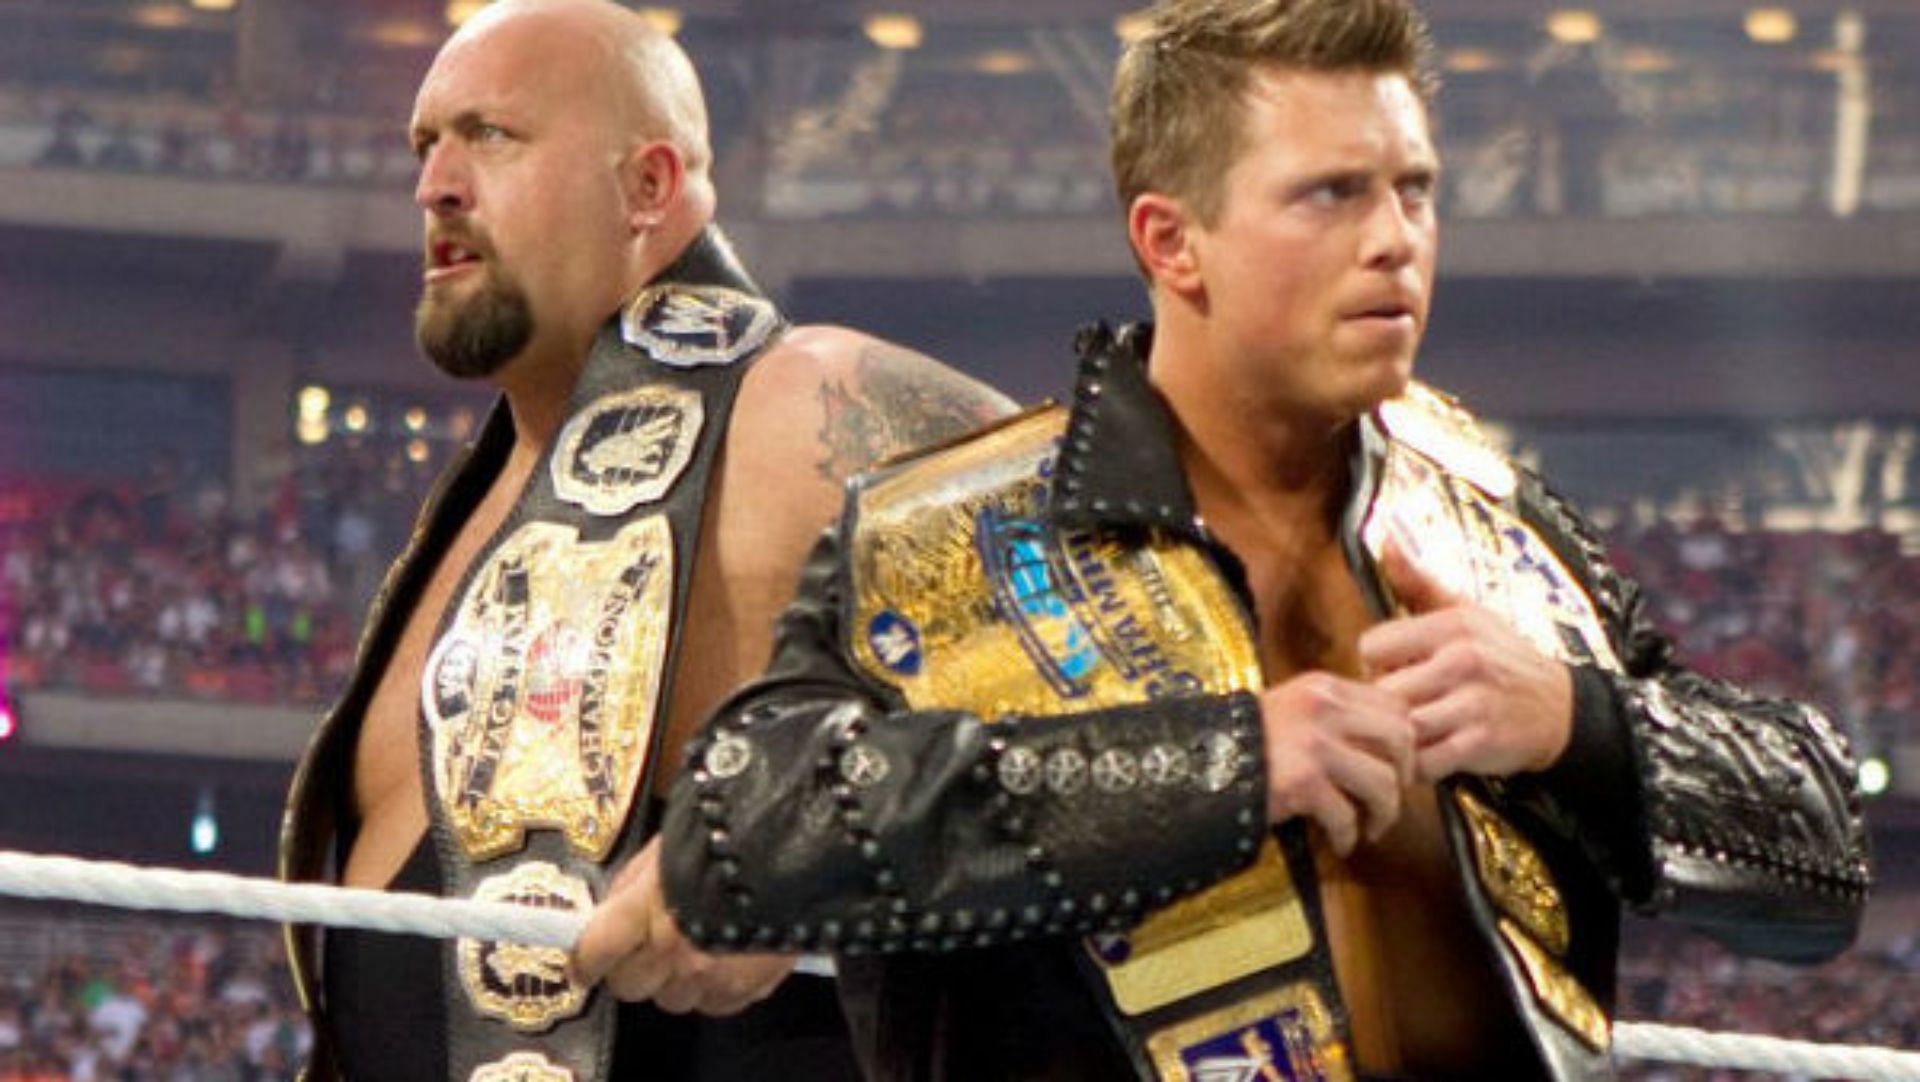 The Miz and The Big Show had a run-in with the same celebrity.